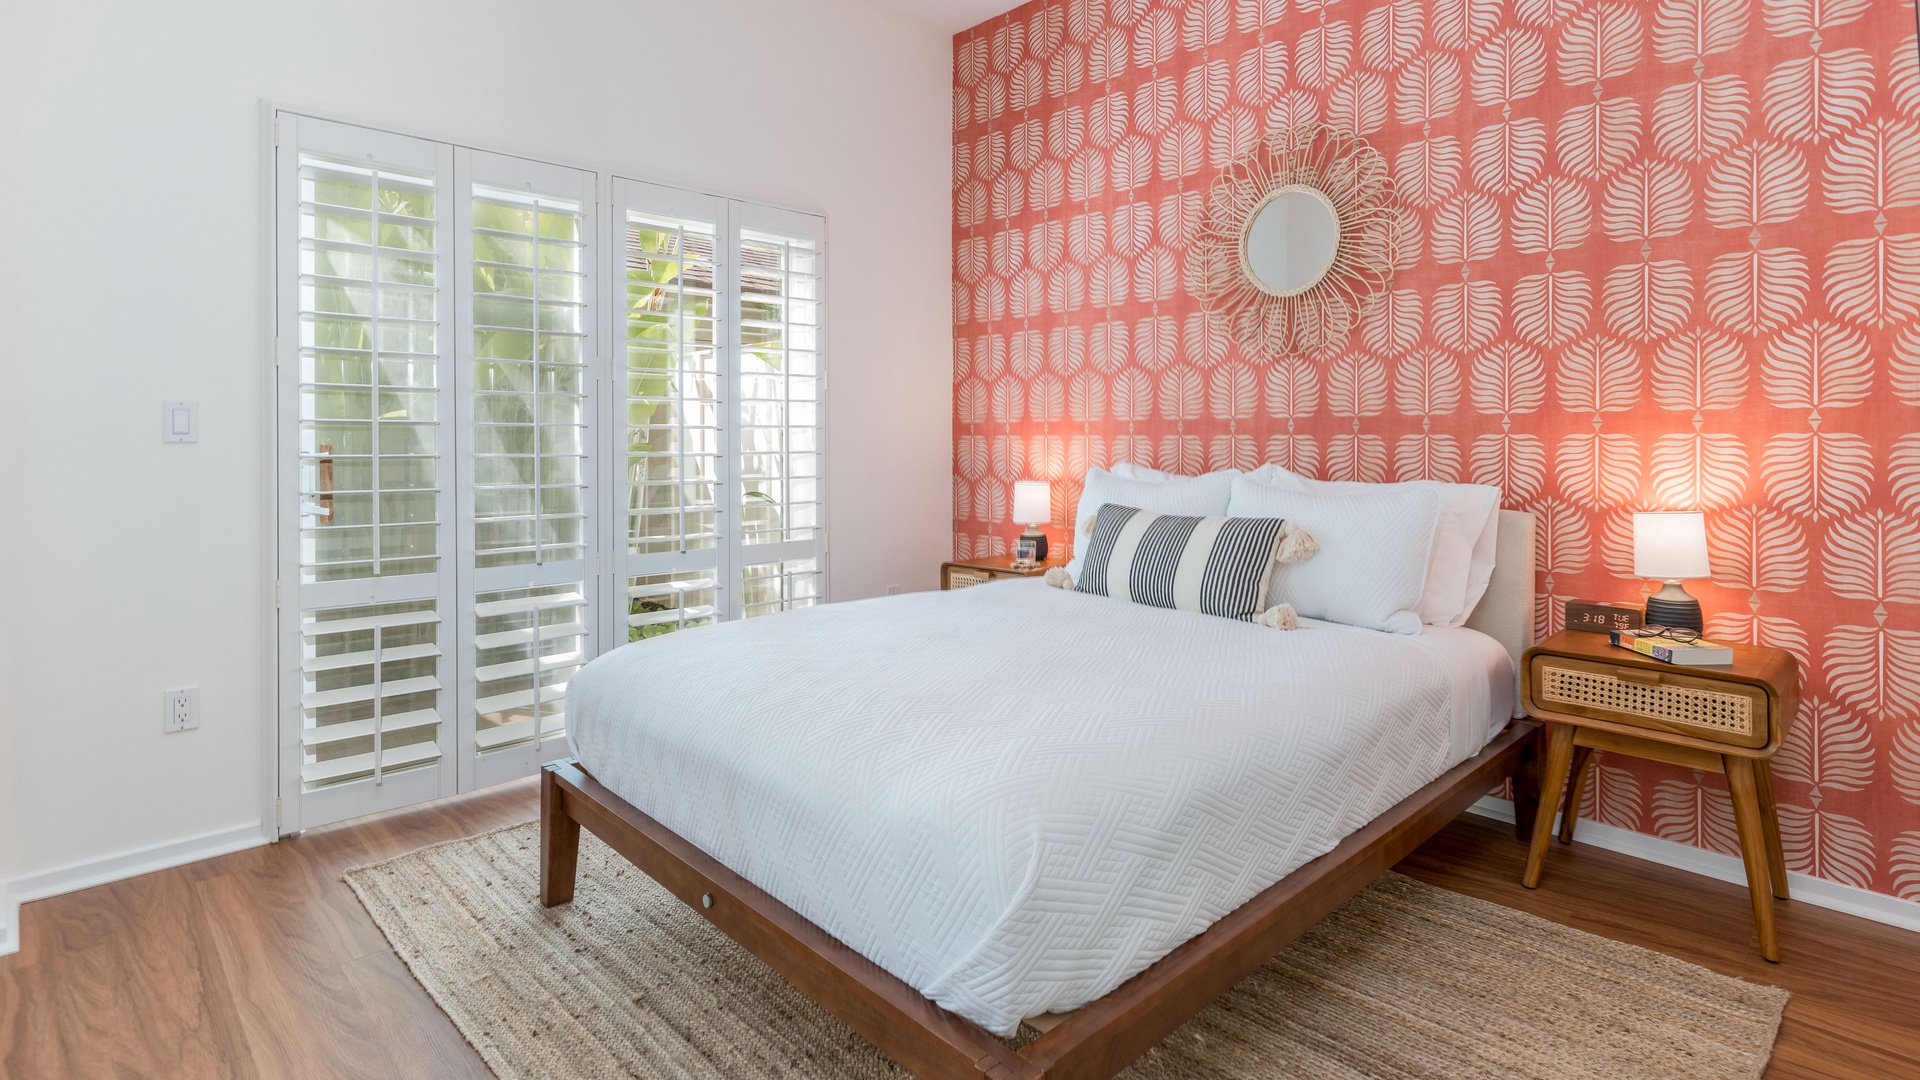 Kapolei Vacation Rentals, Coconut Plantation 1136-4 - The downstairs guest bedroom with a brilliant accent wall.